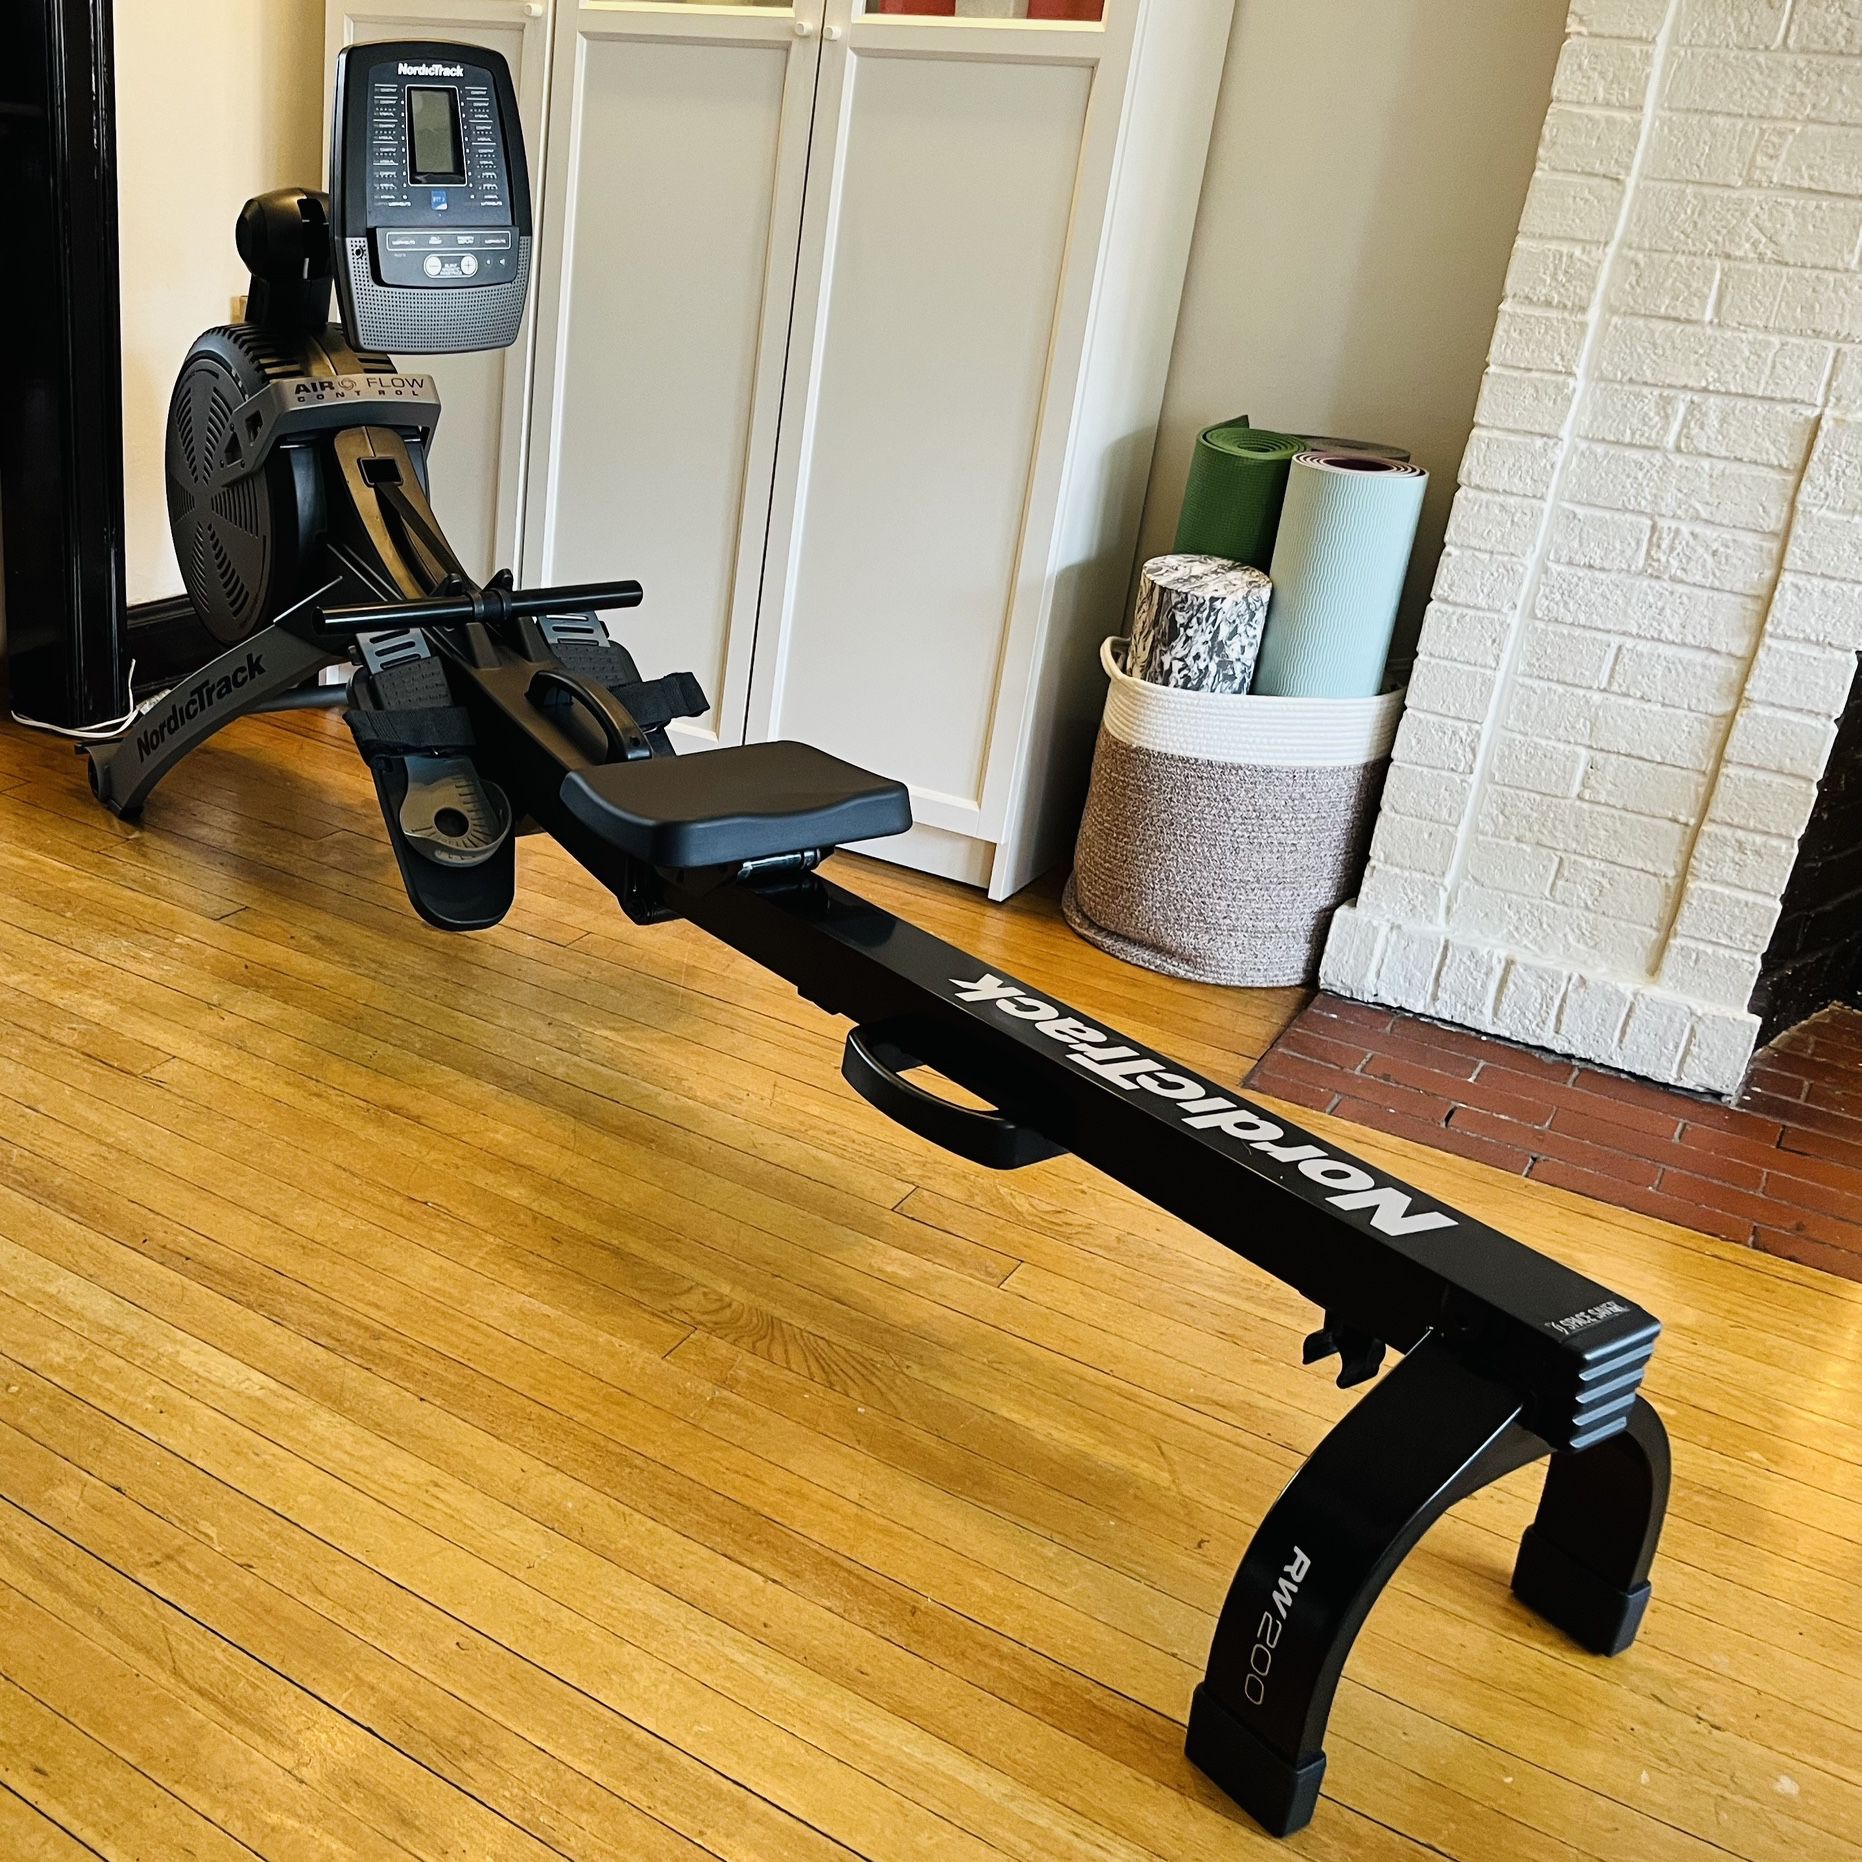 NordicTrack Foldable Rowing Machine